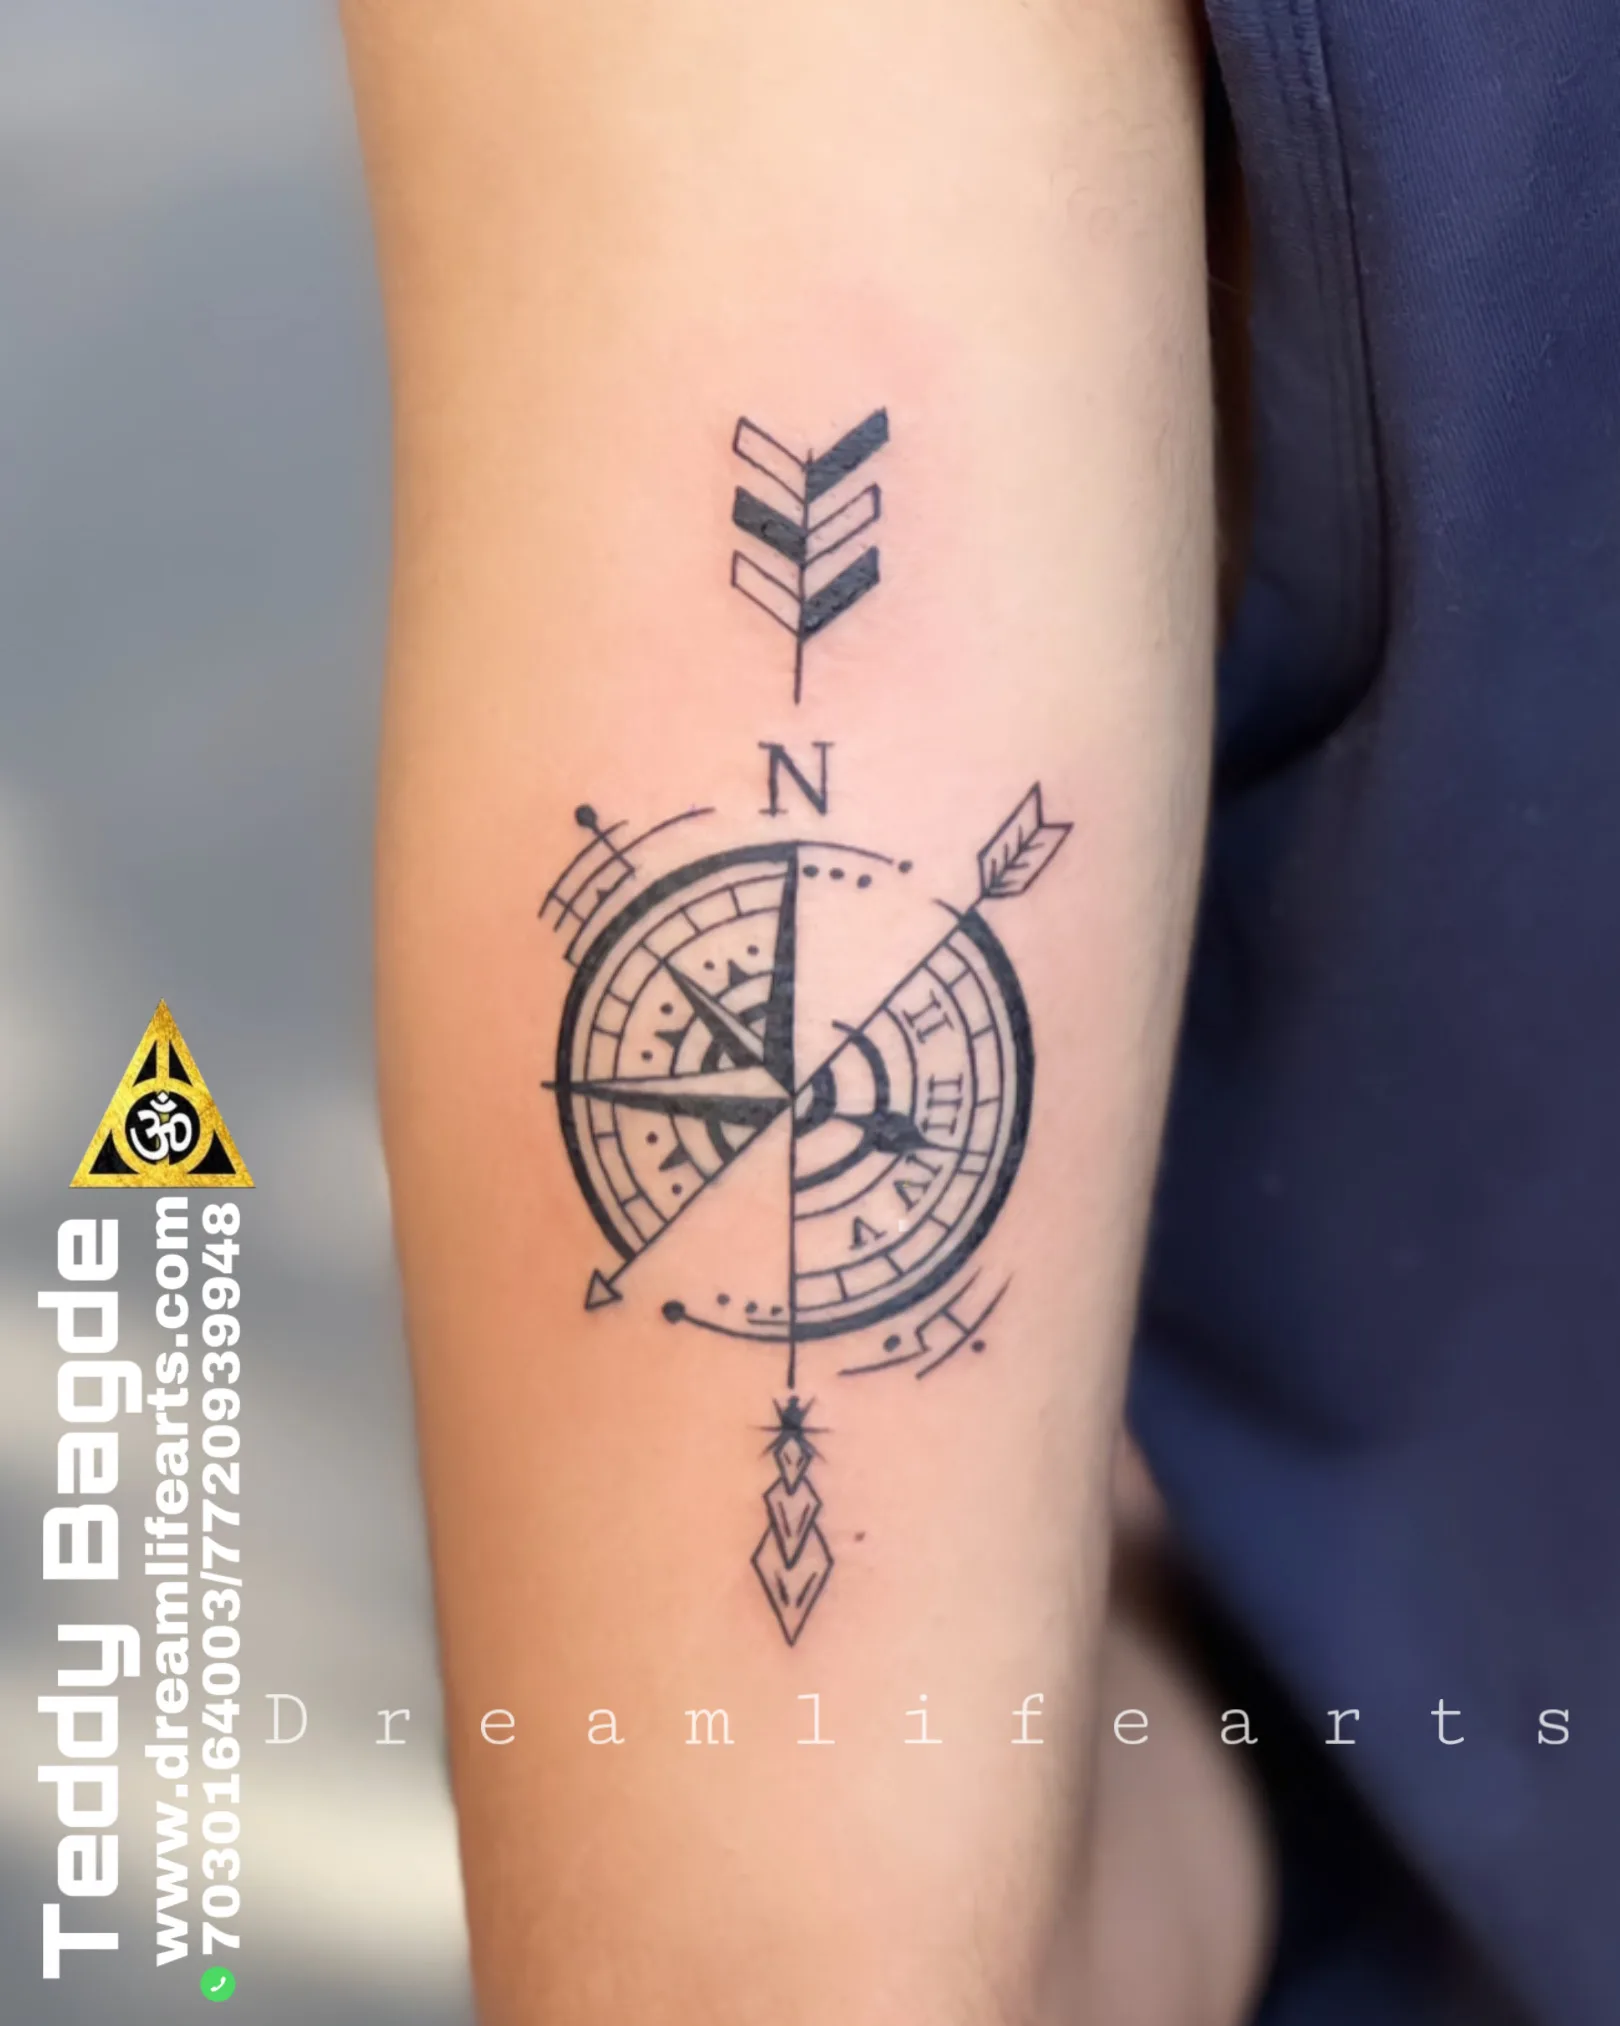 Classic Sailor Tattoo Meanings | Military.com